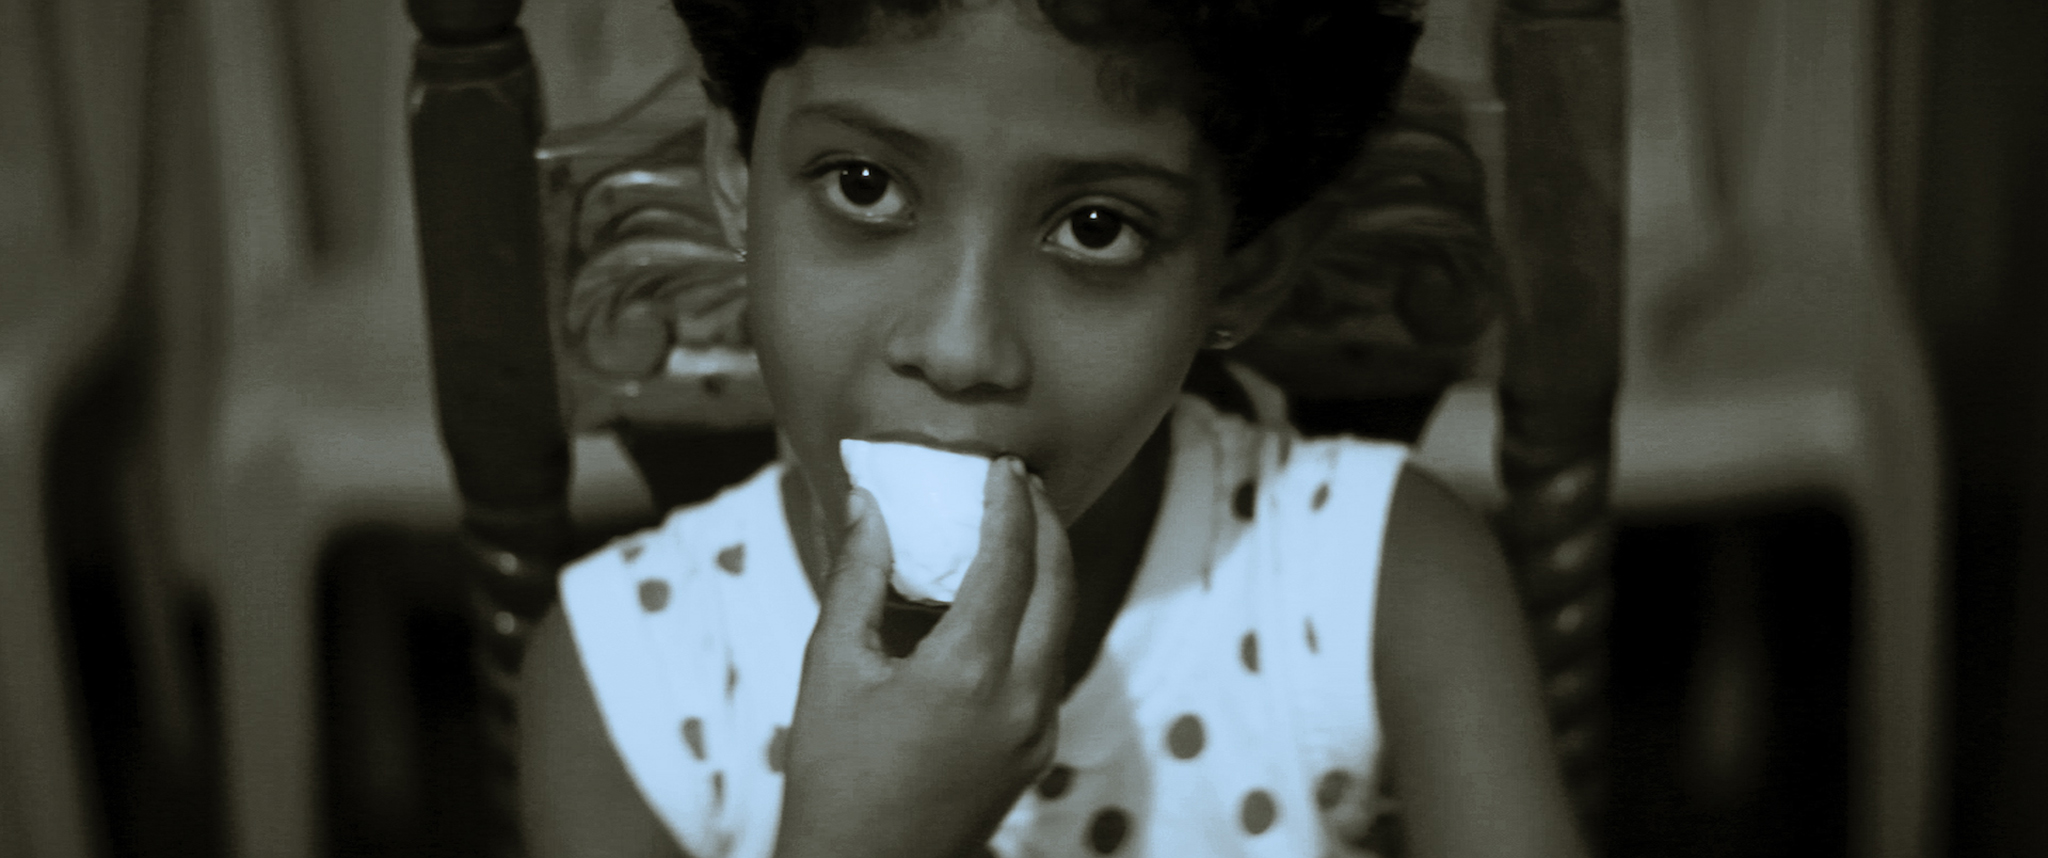 A child eats a piece of food.